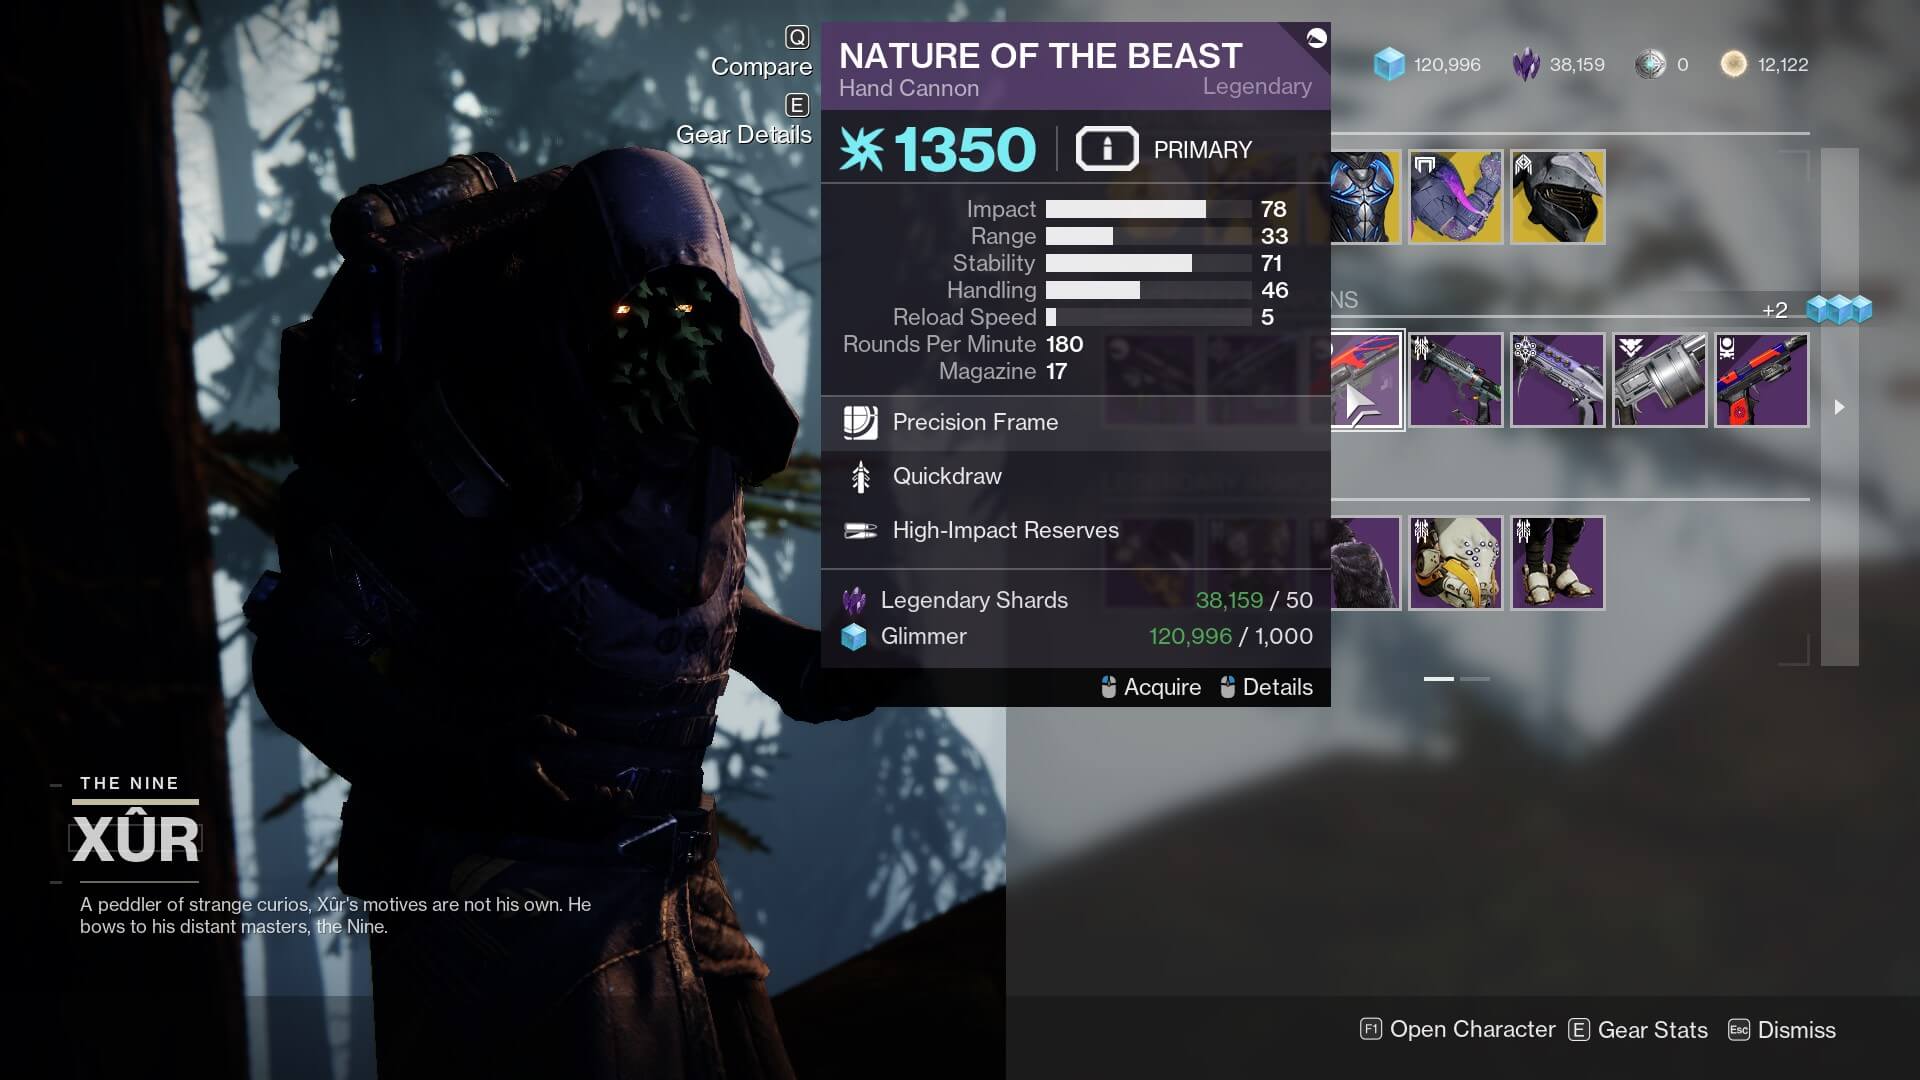 Where Is Xur Today In Destiny 2? Location And Exotic Inventory - February 3, 2023